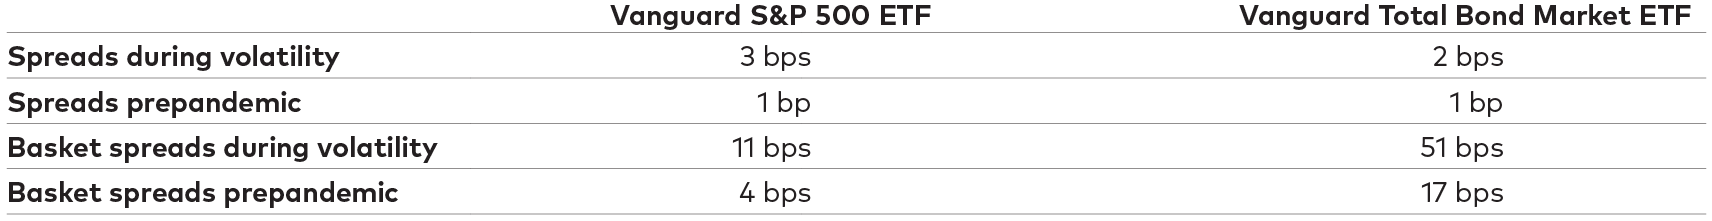 This table shows how bid-ask spreads for two of Vanguard's flagship ETFs, Vanguard S&P 500 ETF (VOO) and Vanguard Total Bond Market ETF (BND), remained significantly narrower than the spreads for the underlying securities throughout the pandemic-related volatility.